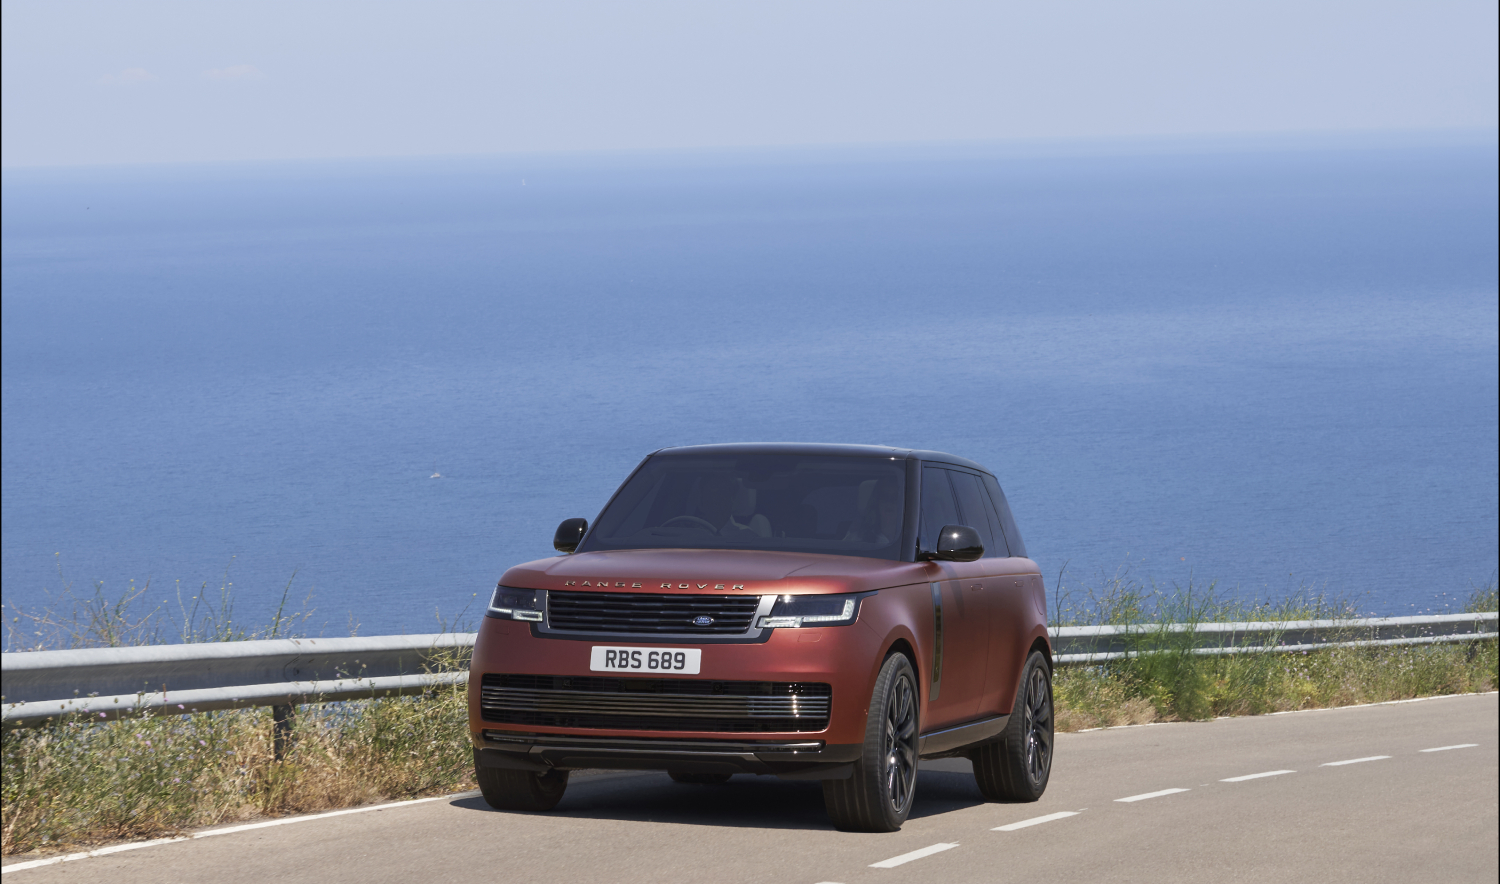 Consumer Reports likes the the 2022 Land Rover Range Rover